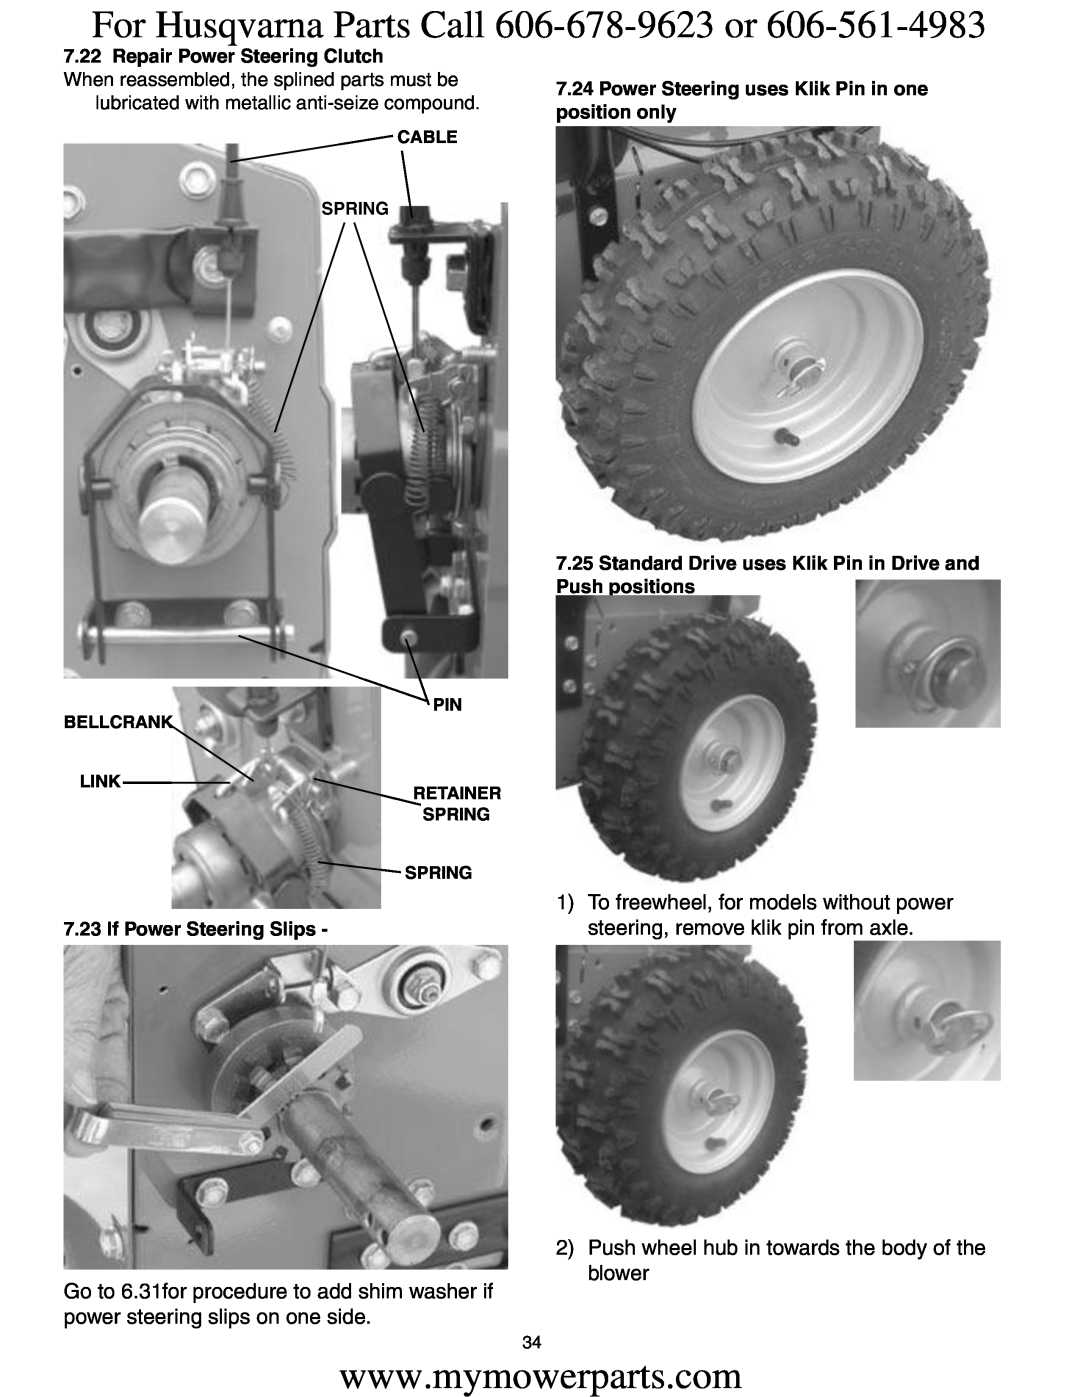 Electrolux OHV service manual For Husqvarna Parts Call 606-678-9623 or, Push wheel hub in towards the body of the blower 